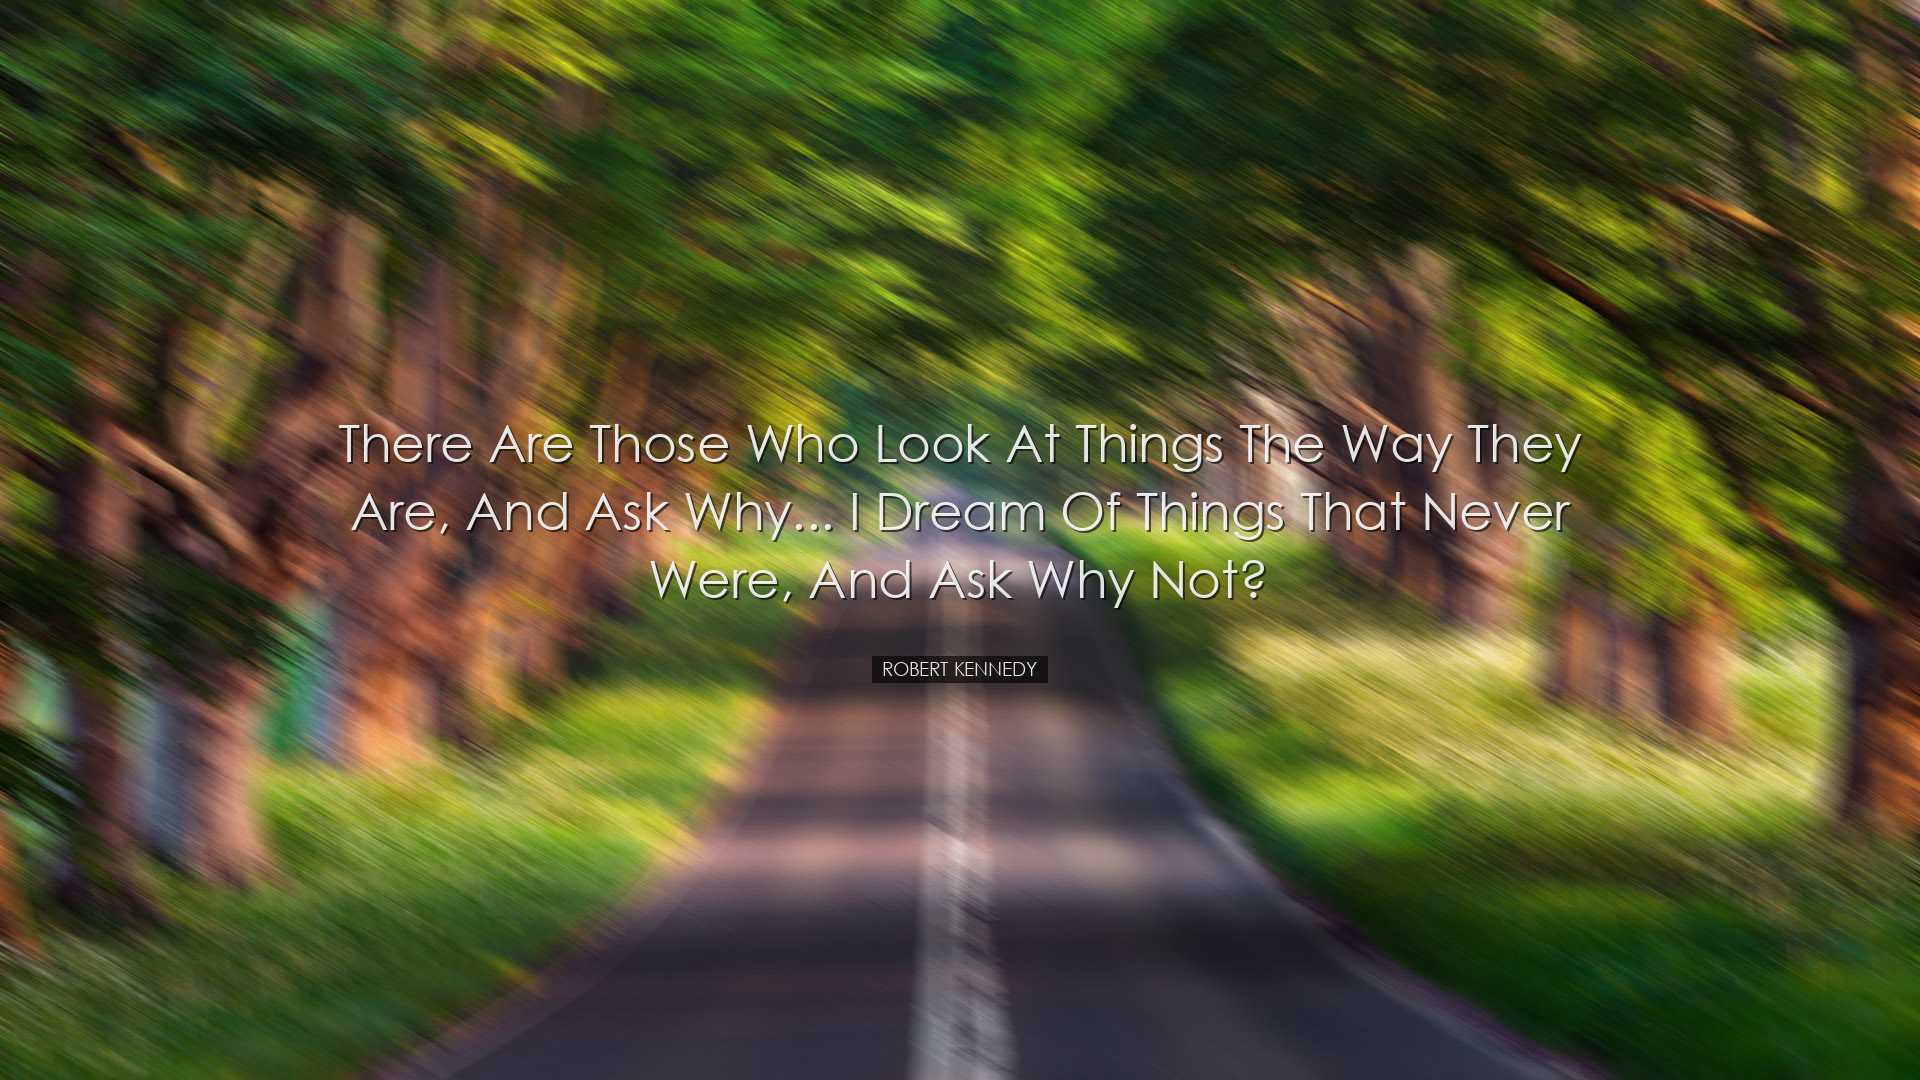 There are those who look at things the way they are, and ask why..